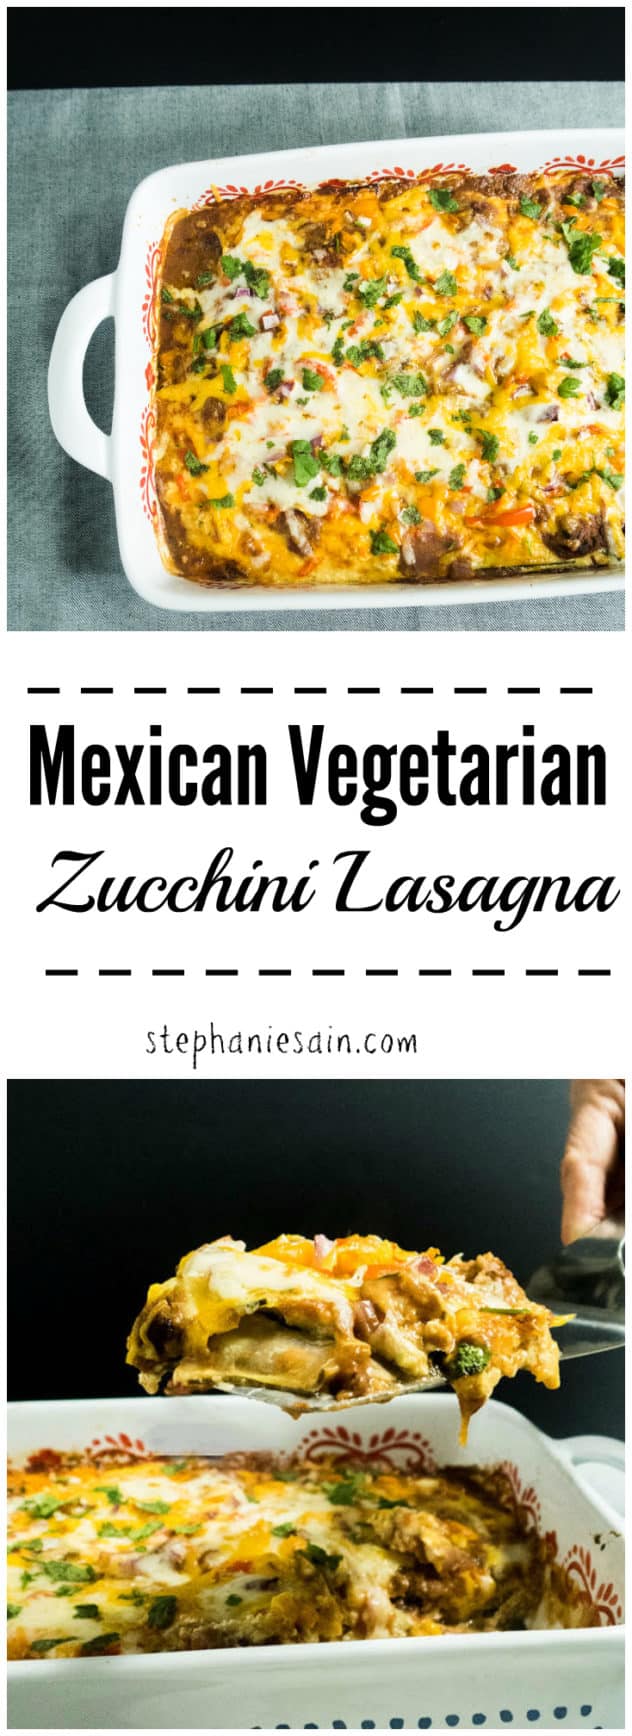 Mexican Vegetarian Zucchini Lasagna has all the flavors of Mexican and Italian combined. The perfect, tasty, healthy dinner for any night of the week. Gluten Free & Vegetarian.